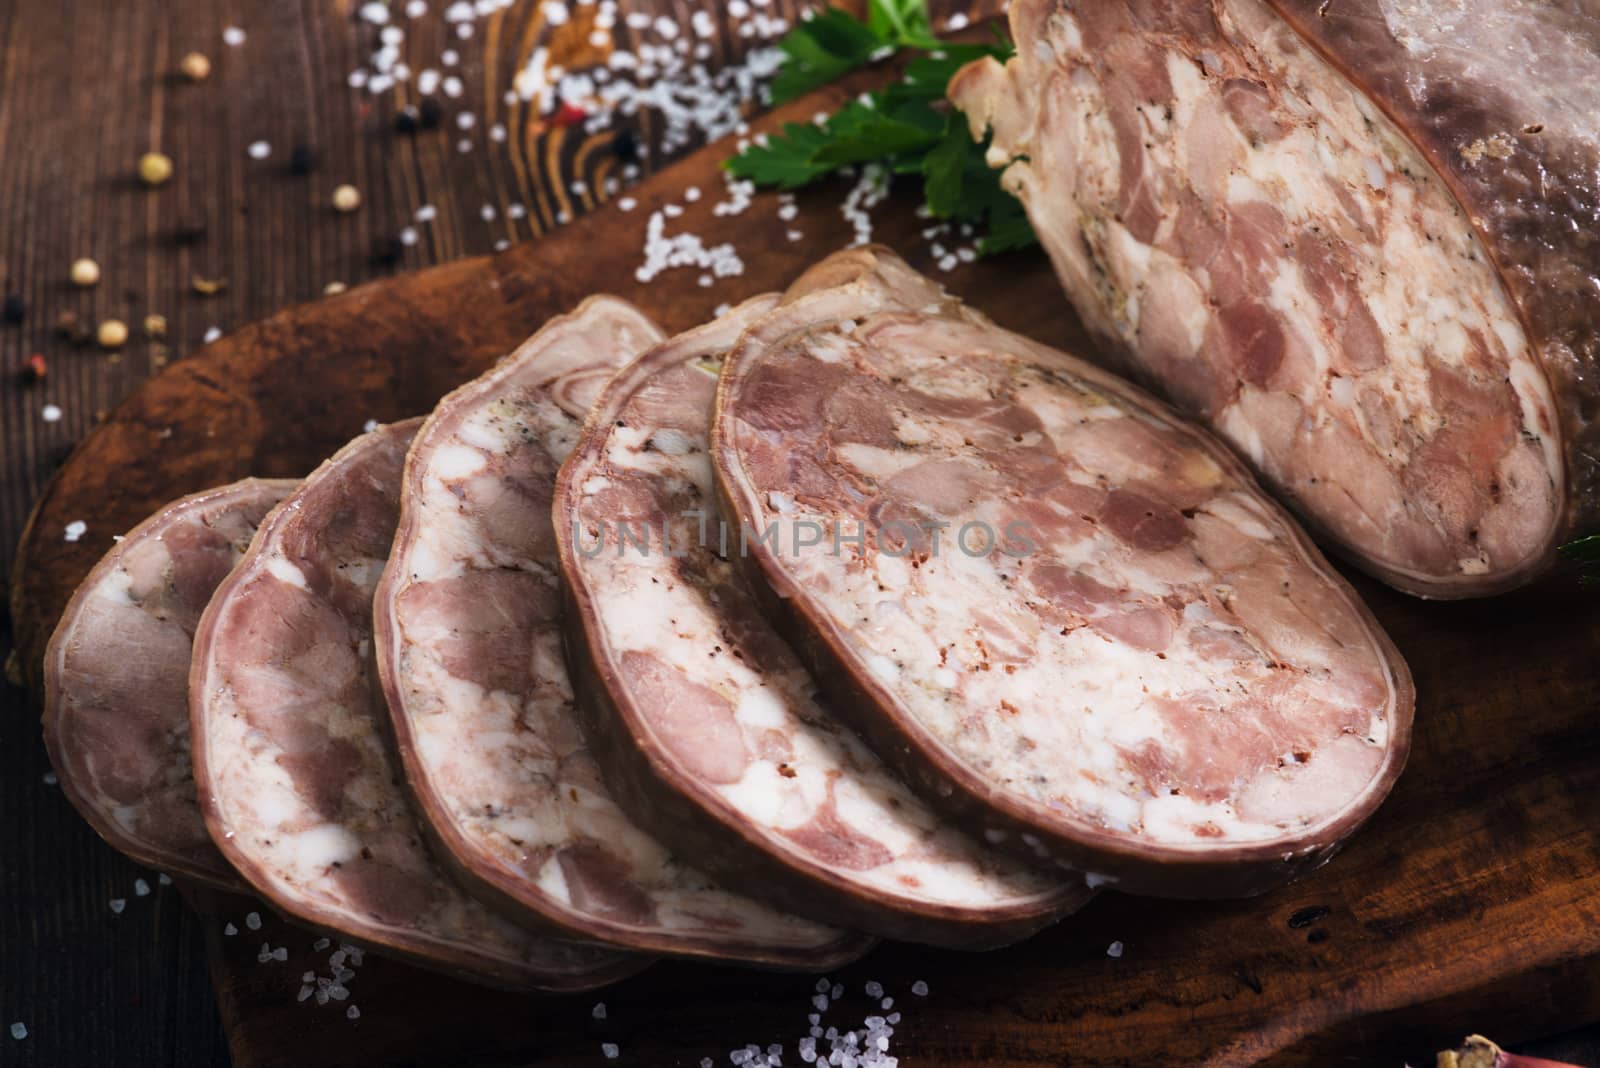 Sliced pork saltisons with herbs on a slate cutting board on wooden background